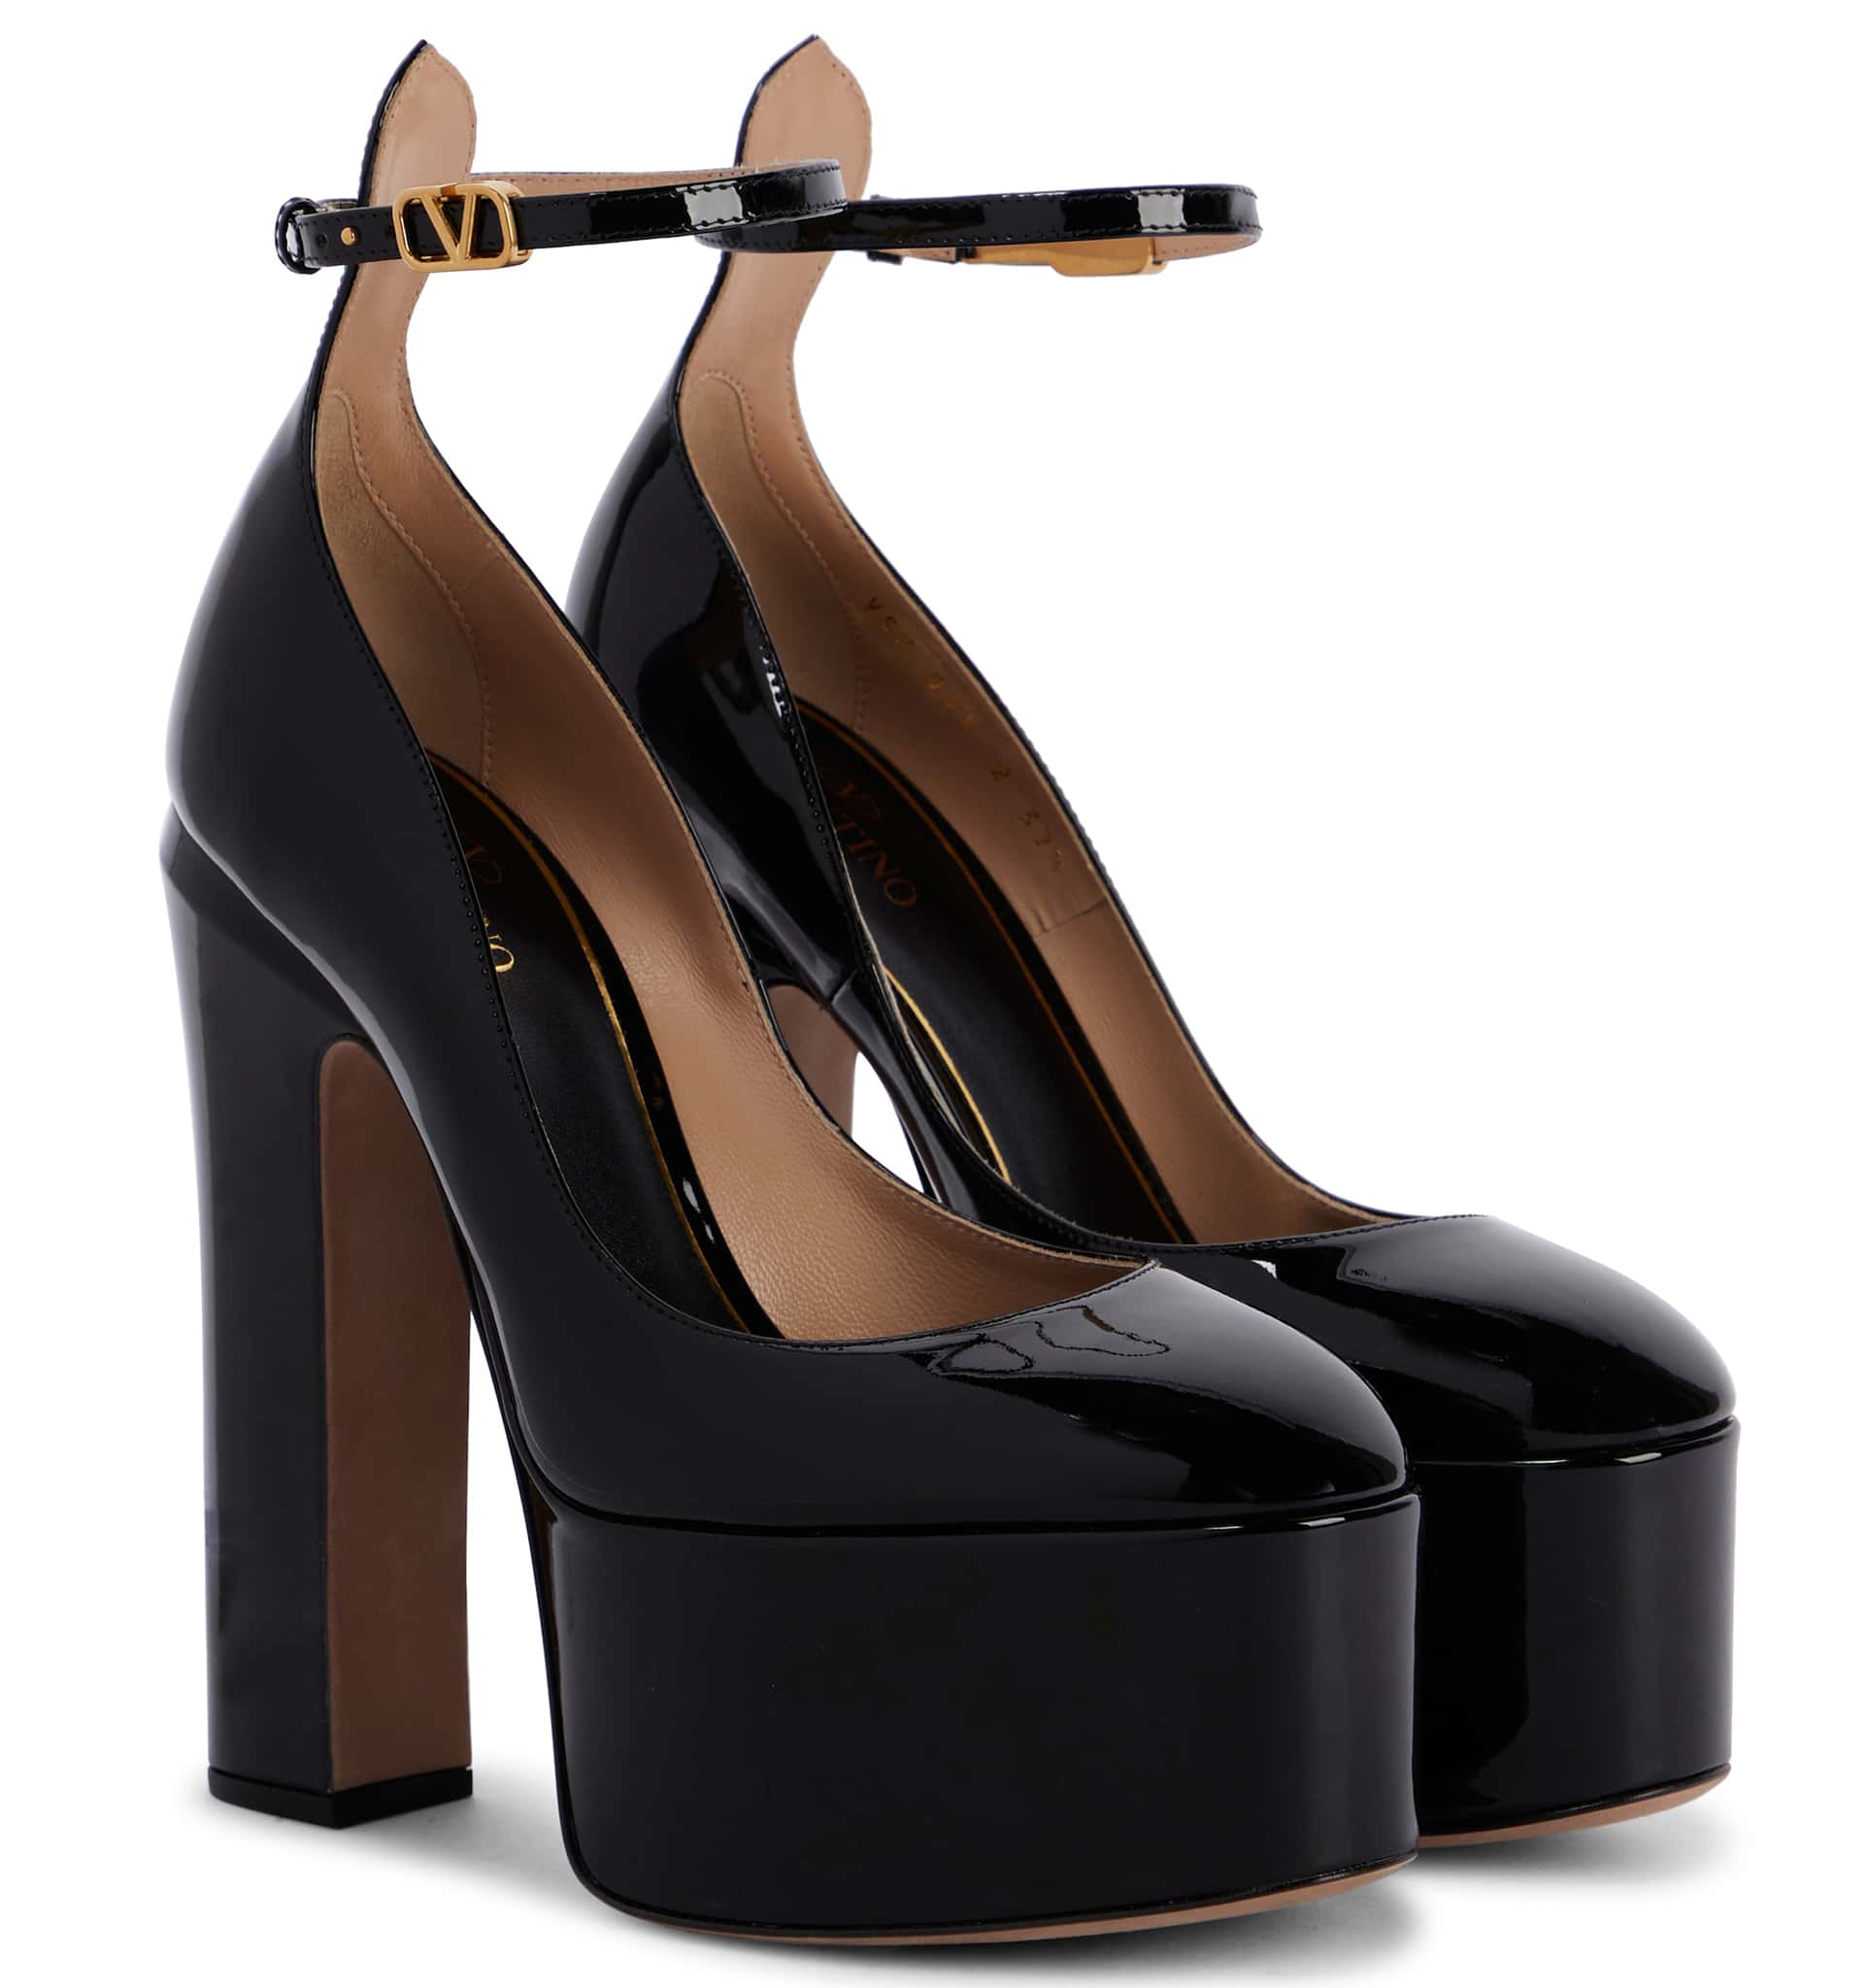 These Italian-crafted pumps feature towering platforms and heels, measuring about 2.2 inches and 6.1 inches, respectively